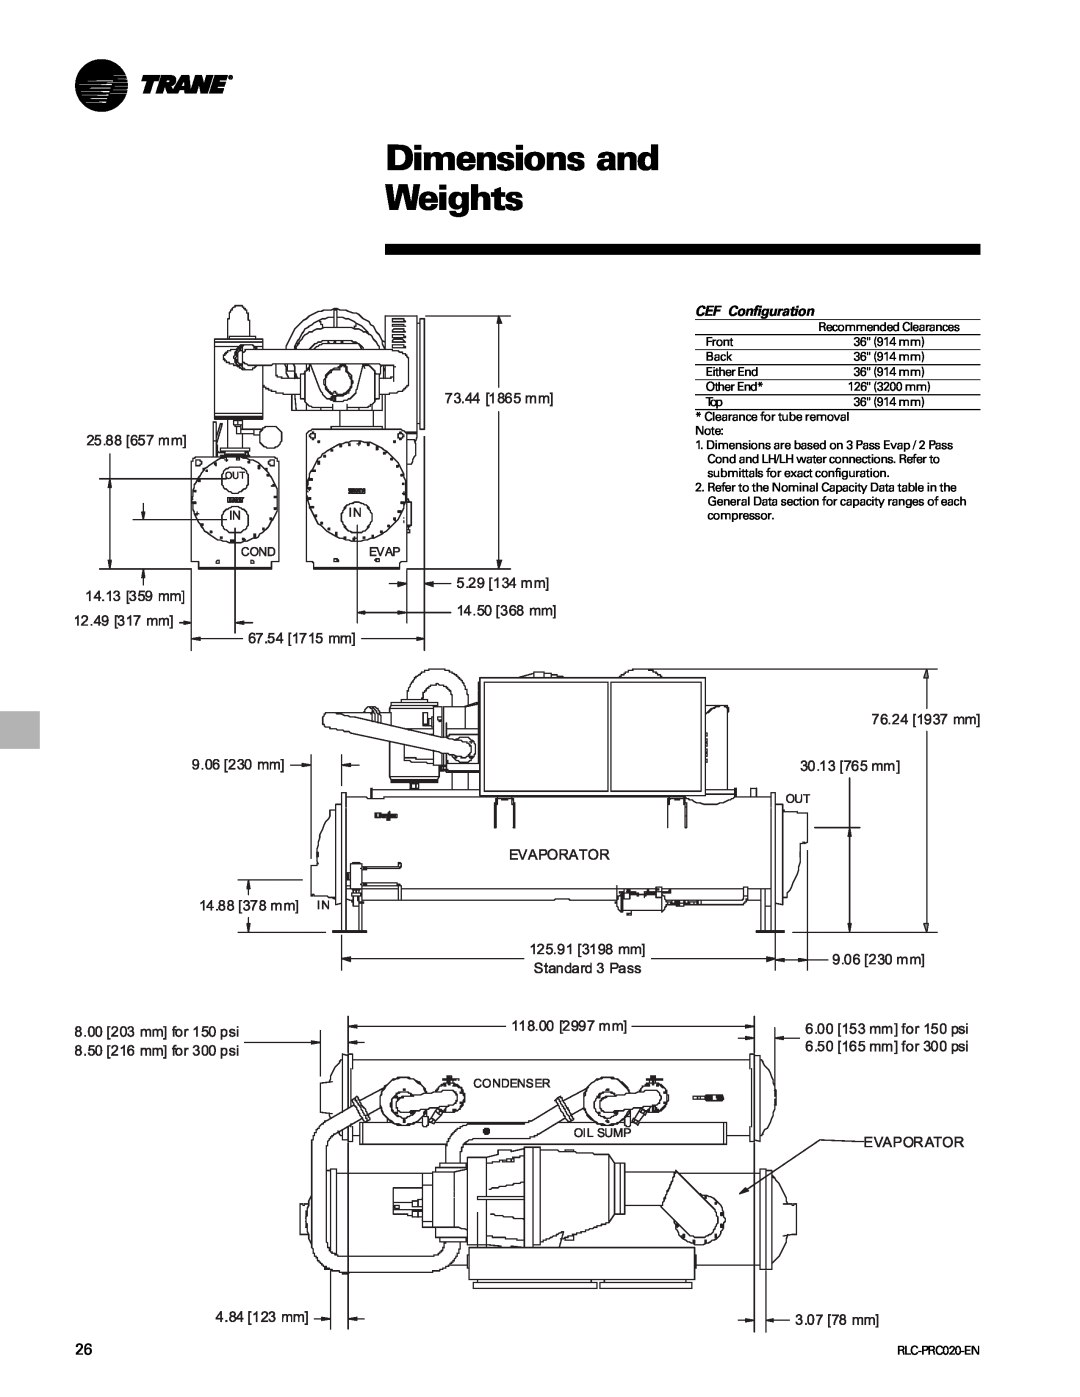 Trane RTHD manual Dimensions and Weights, CEF Configuration 